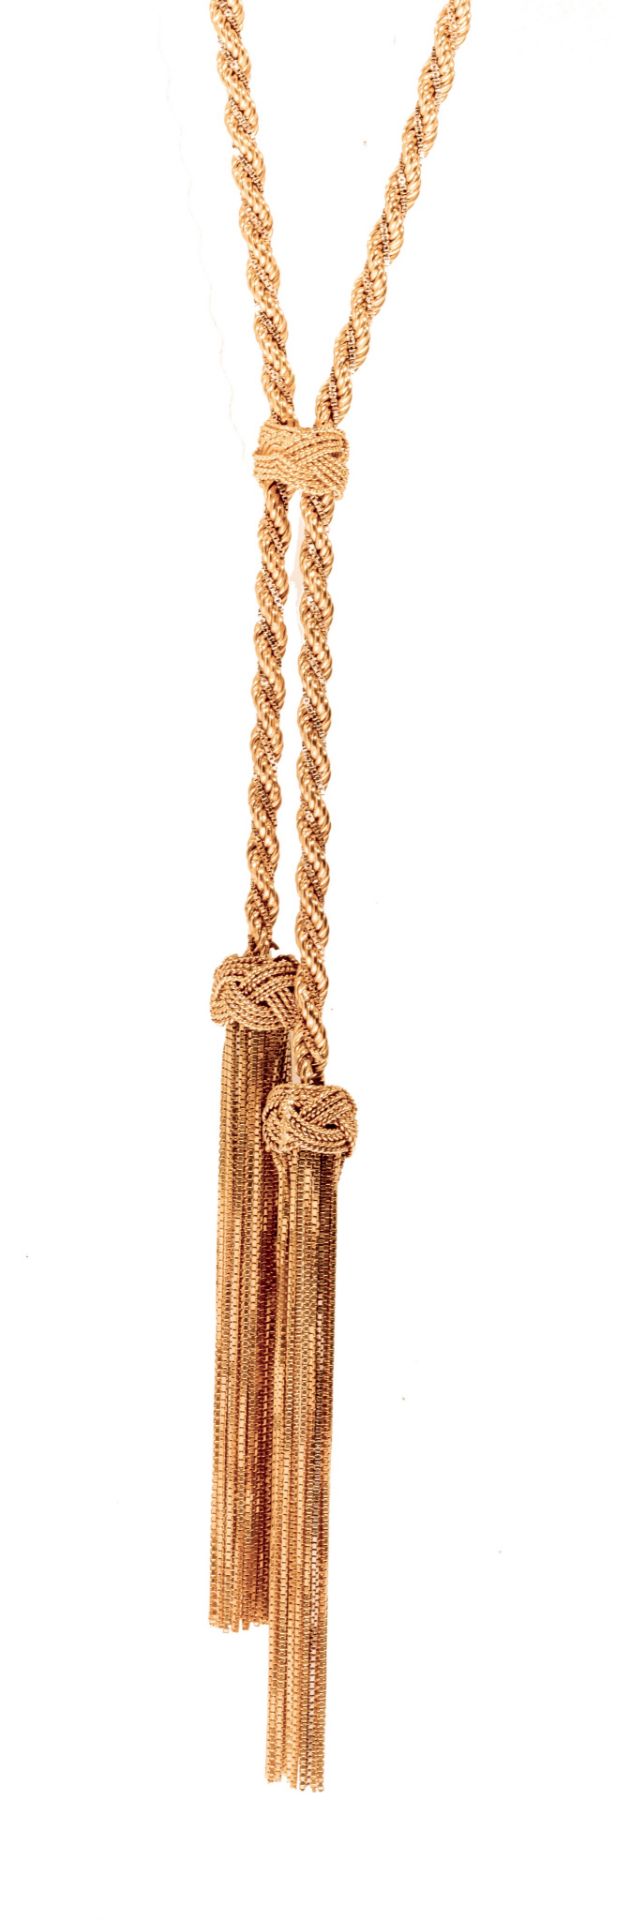 A tassel chain necklace in 18 ct yellow gold, 123 g - Image 2 of 3